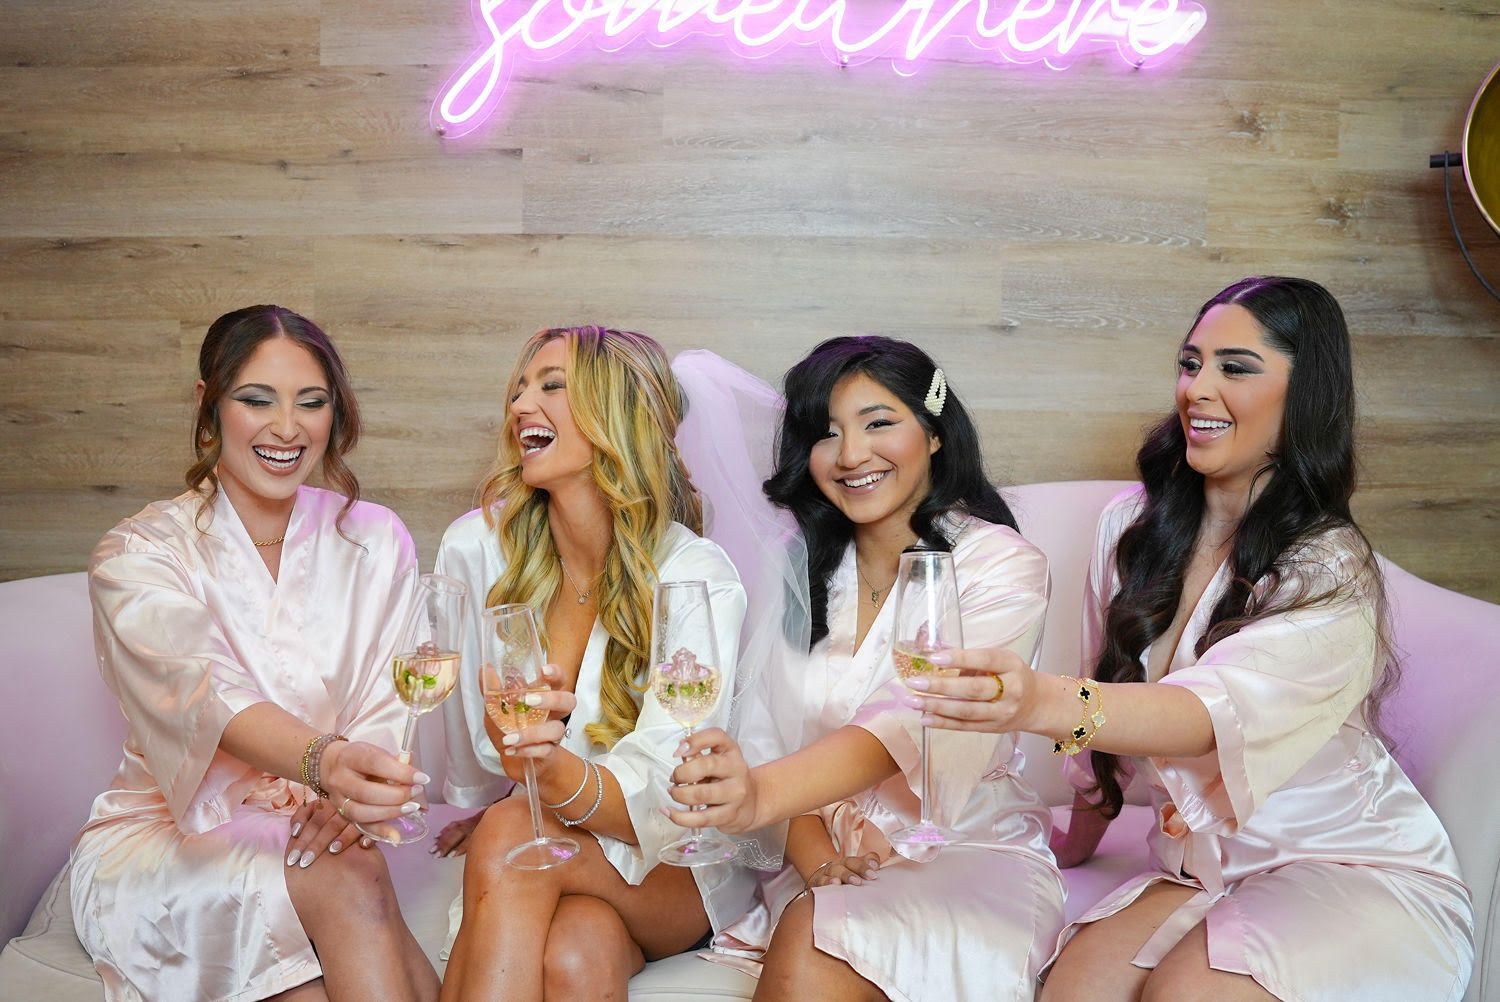 A group of women are sitting on a couch holding champagne glasses.